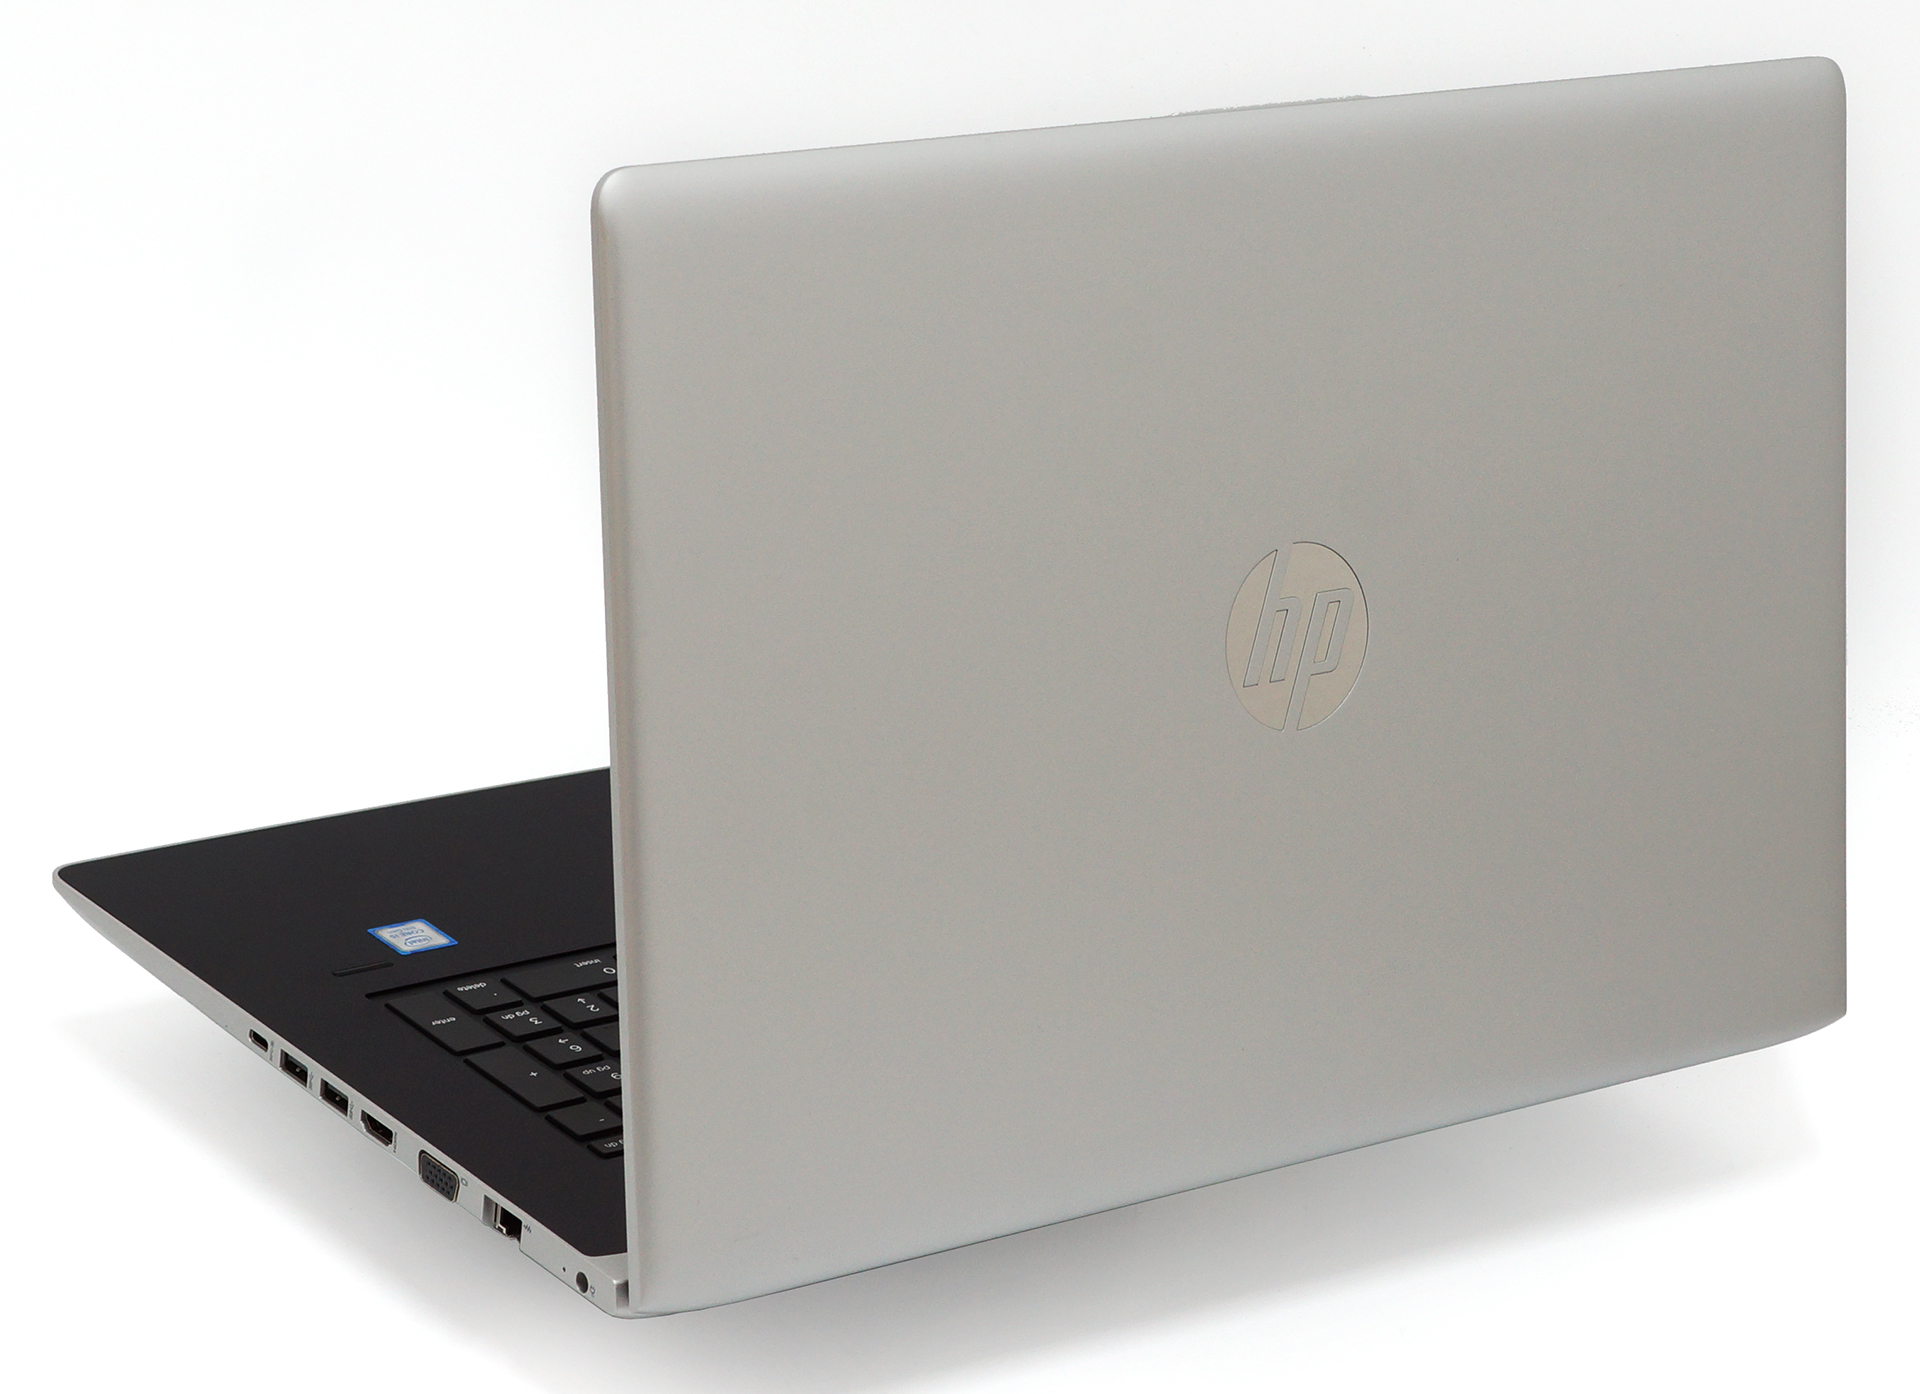 HP ProBook 470 G5 review - redefining the work environment